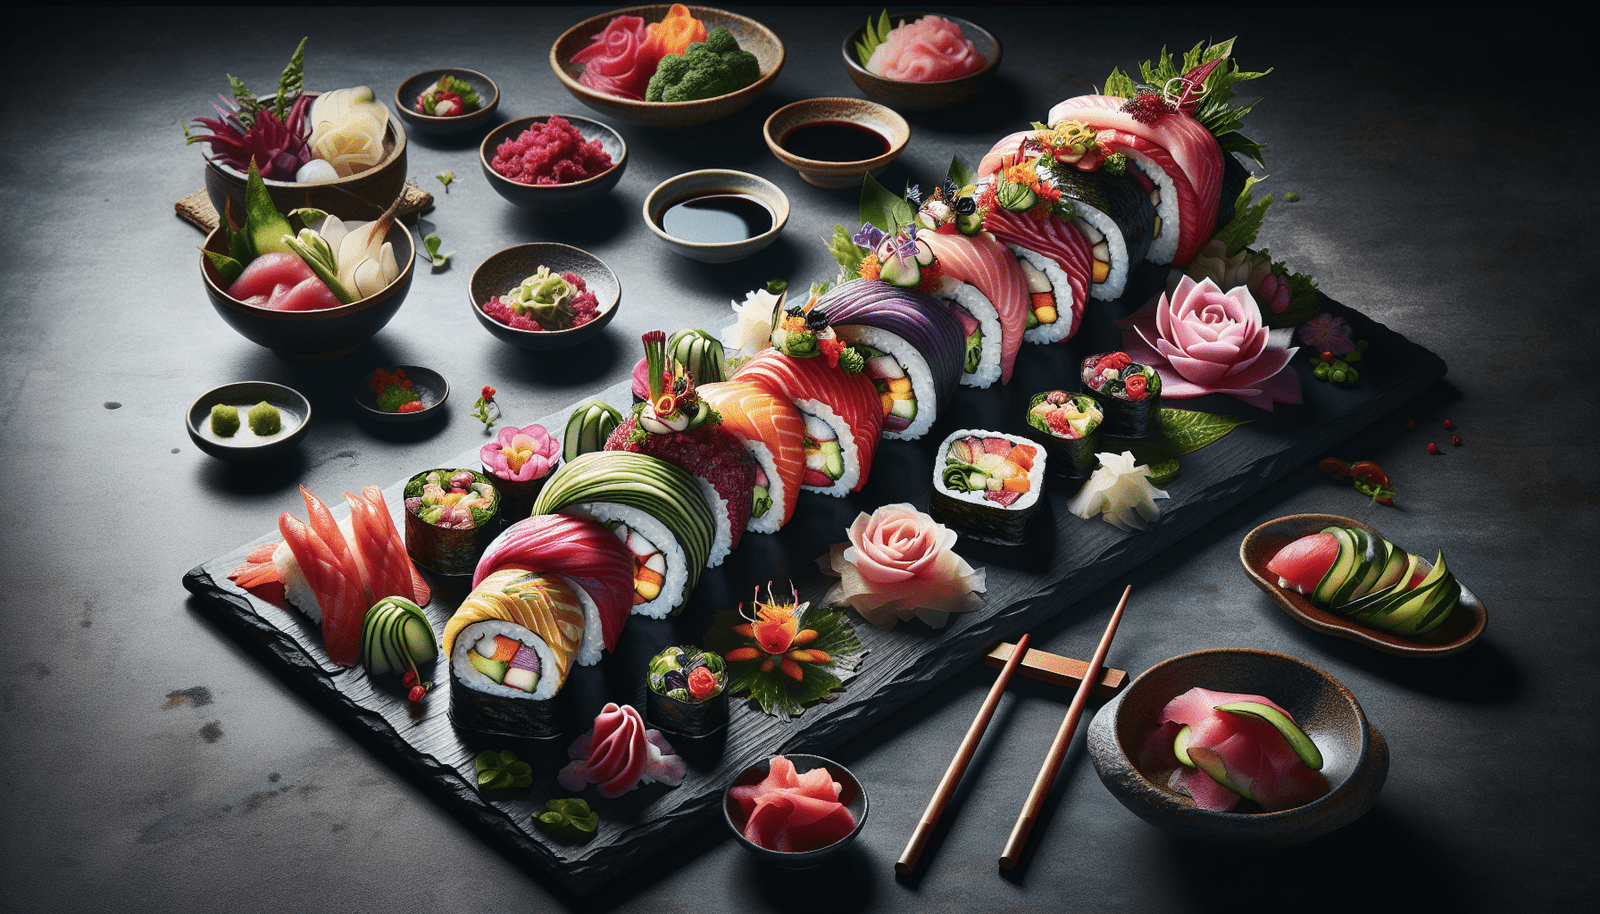 How Do You Create Visually Appealing And Flavorful Korean-inspired Sushi Rolls?